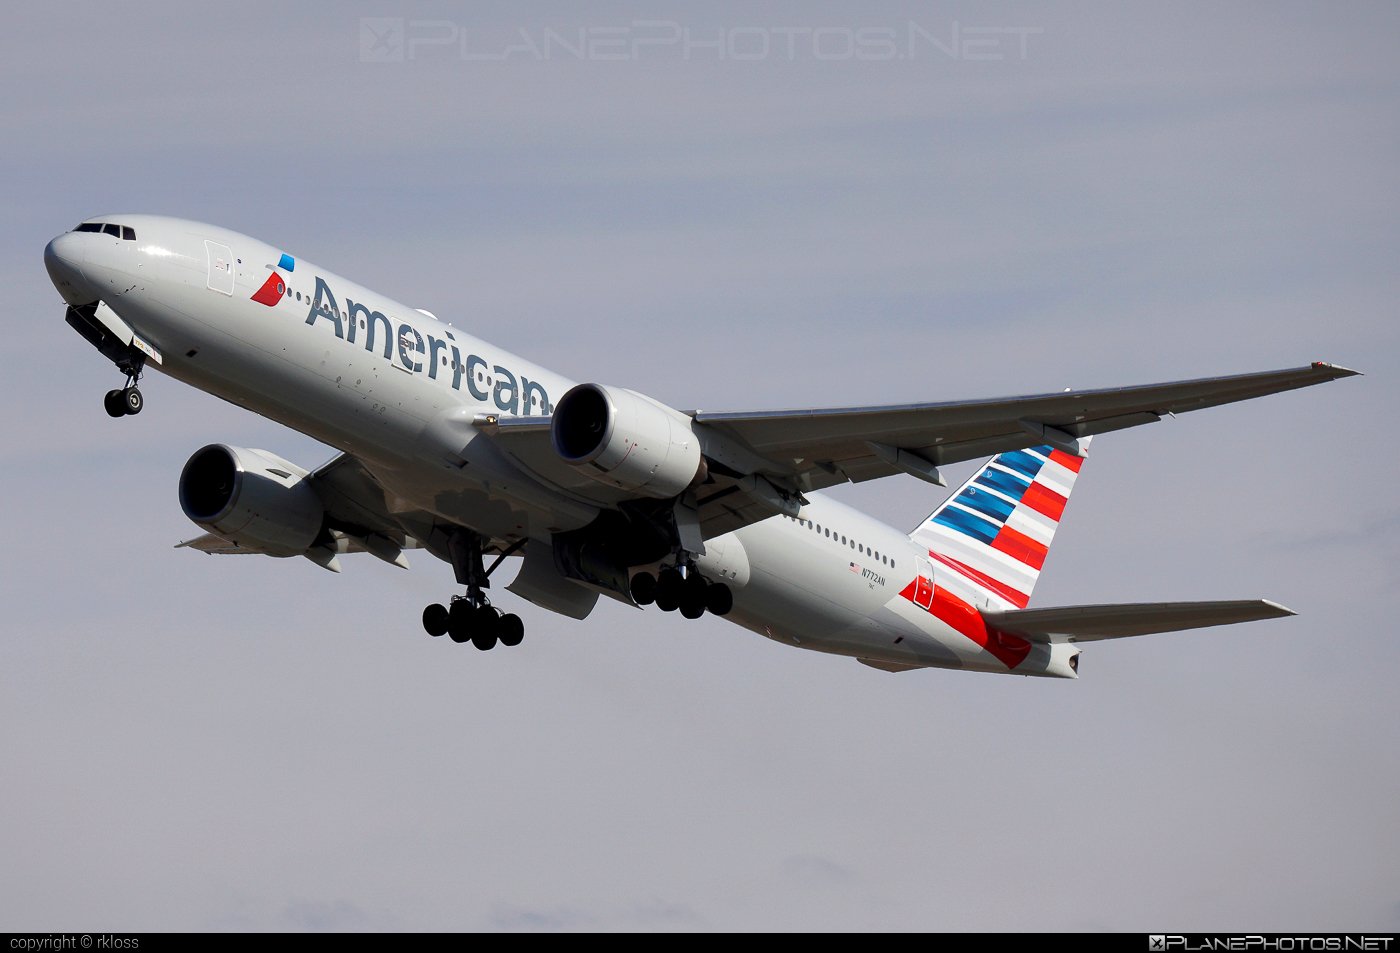 Boeing 777-200ER - N772AN operated by American Airlines #americanairlines #b777 #b777er #boeing #boeing777 #tripleseven